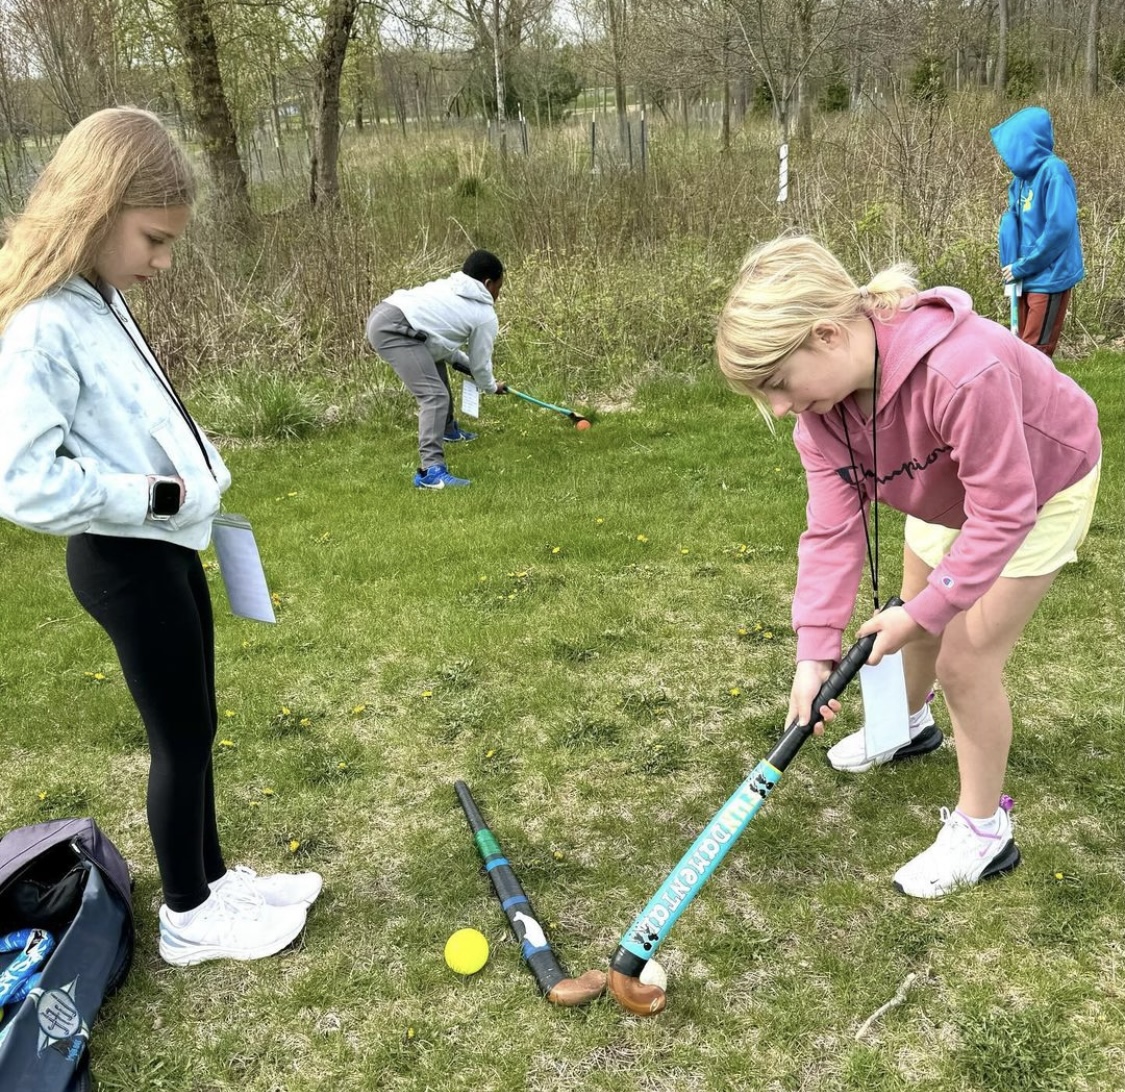 Sticks in hands of 101 new players at the first High Interest Day of the season! @LIFTfh is spreading the word about field hockey to six classes of 1st - 5th graders at Tonawanda Elementary School in Wisconsin. #FUNFriday #GrowthGame 🏑